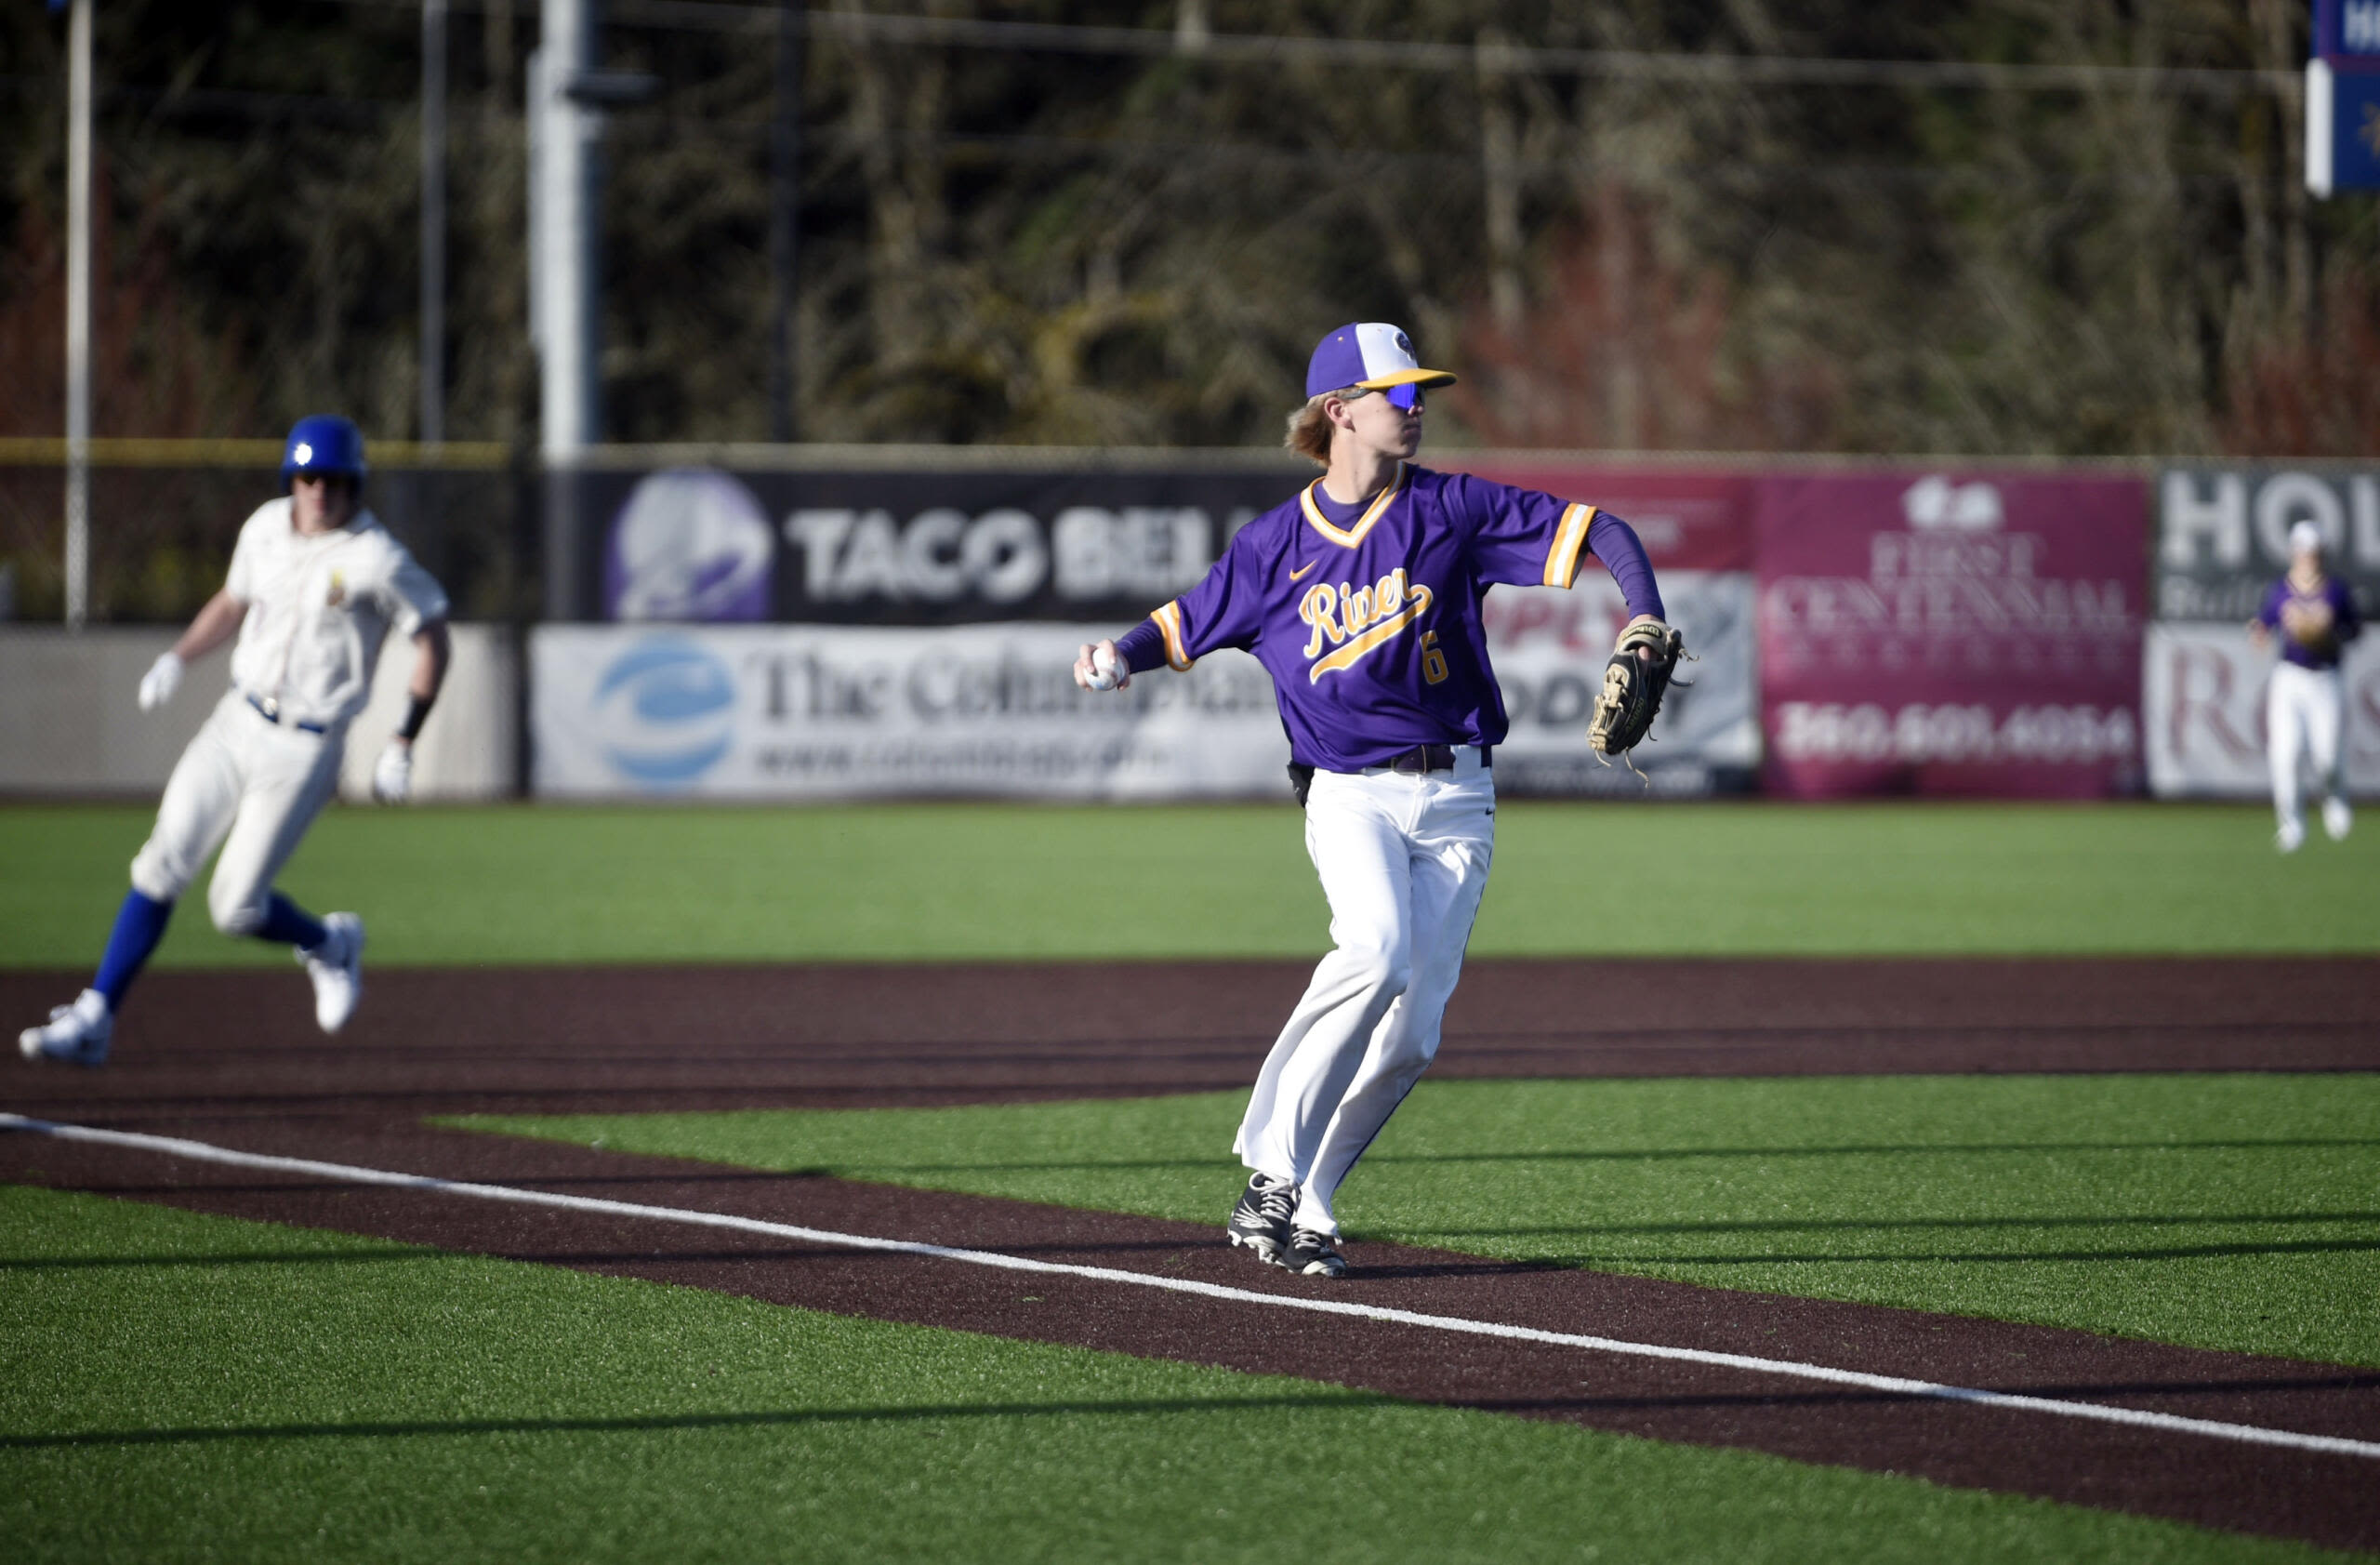 2A district baseball: Nate Little’s walk-off RBI single gives Columbia River state-clinching win over Tumwater